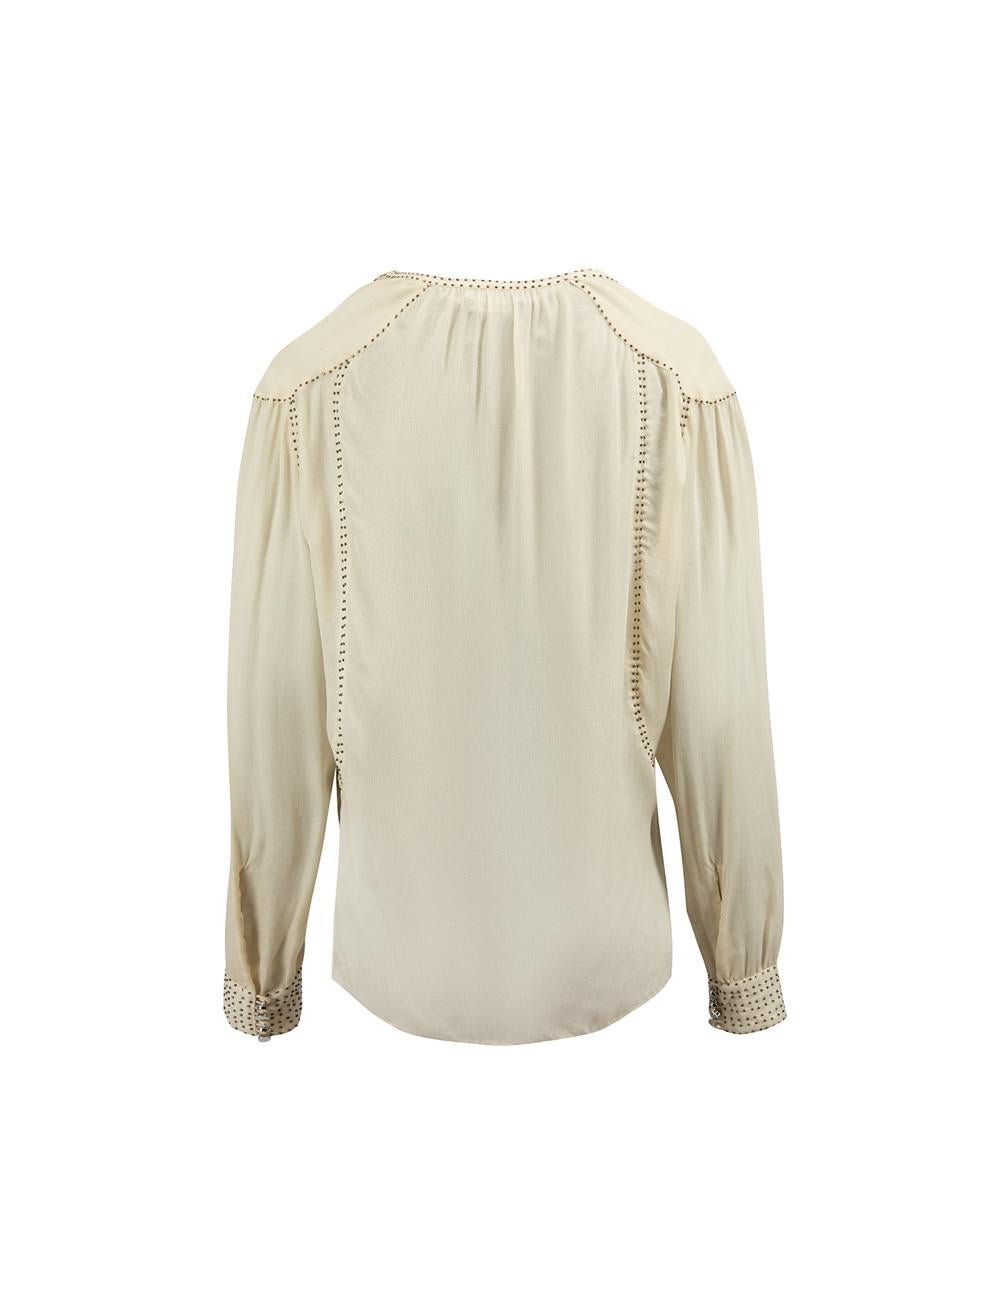 Isabel Marant Beige Silk Beaded Blouse Size S In Good Condition For Sale In London, GB